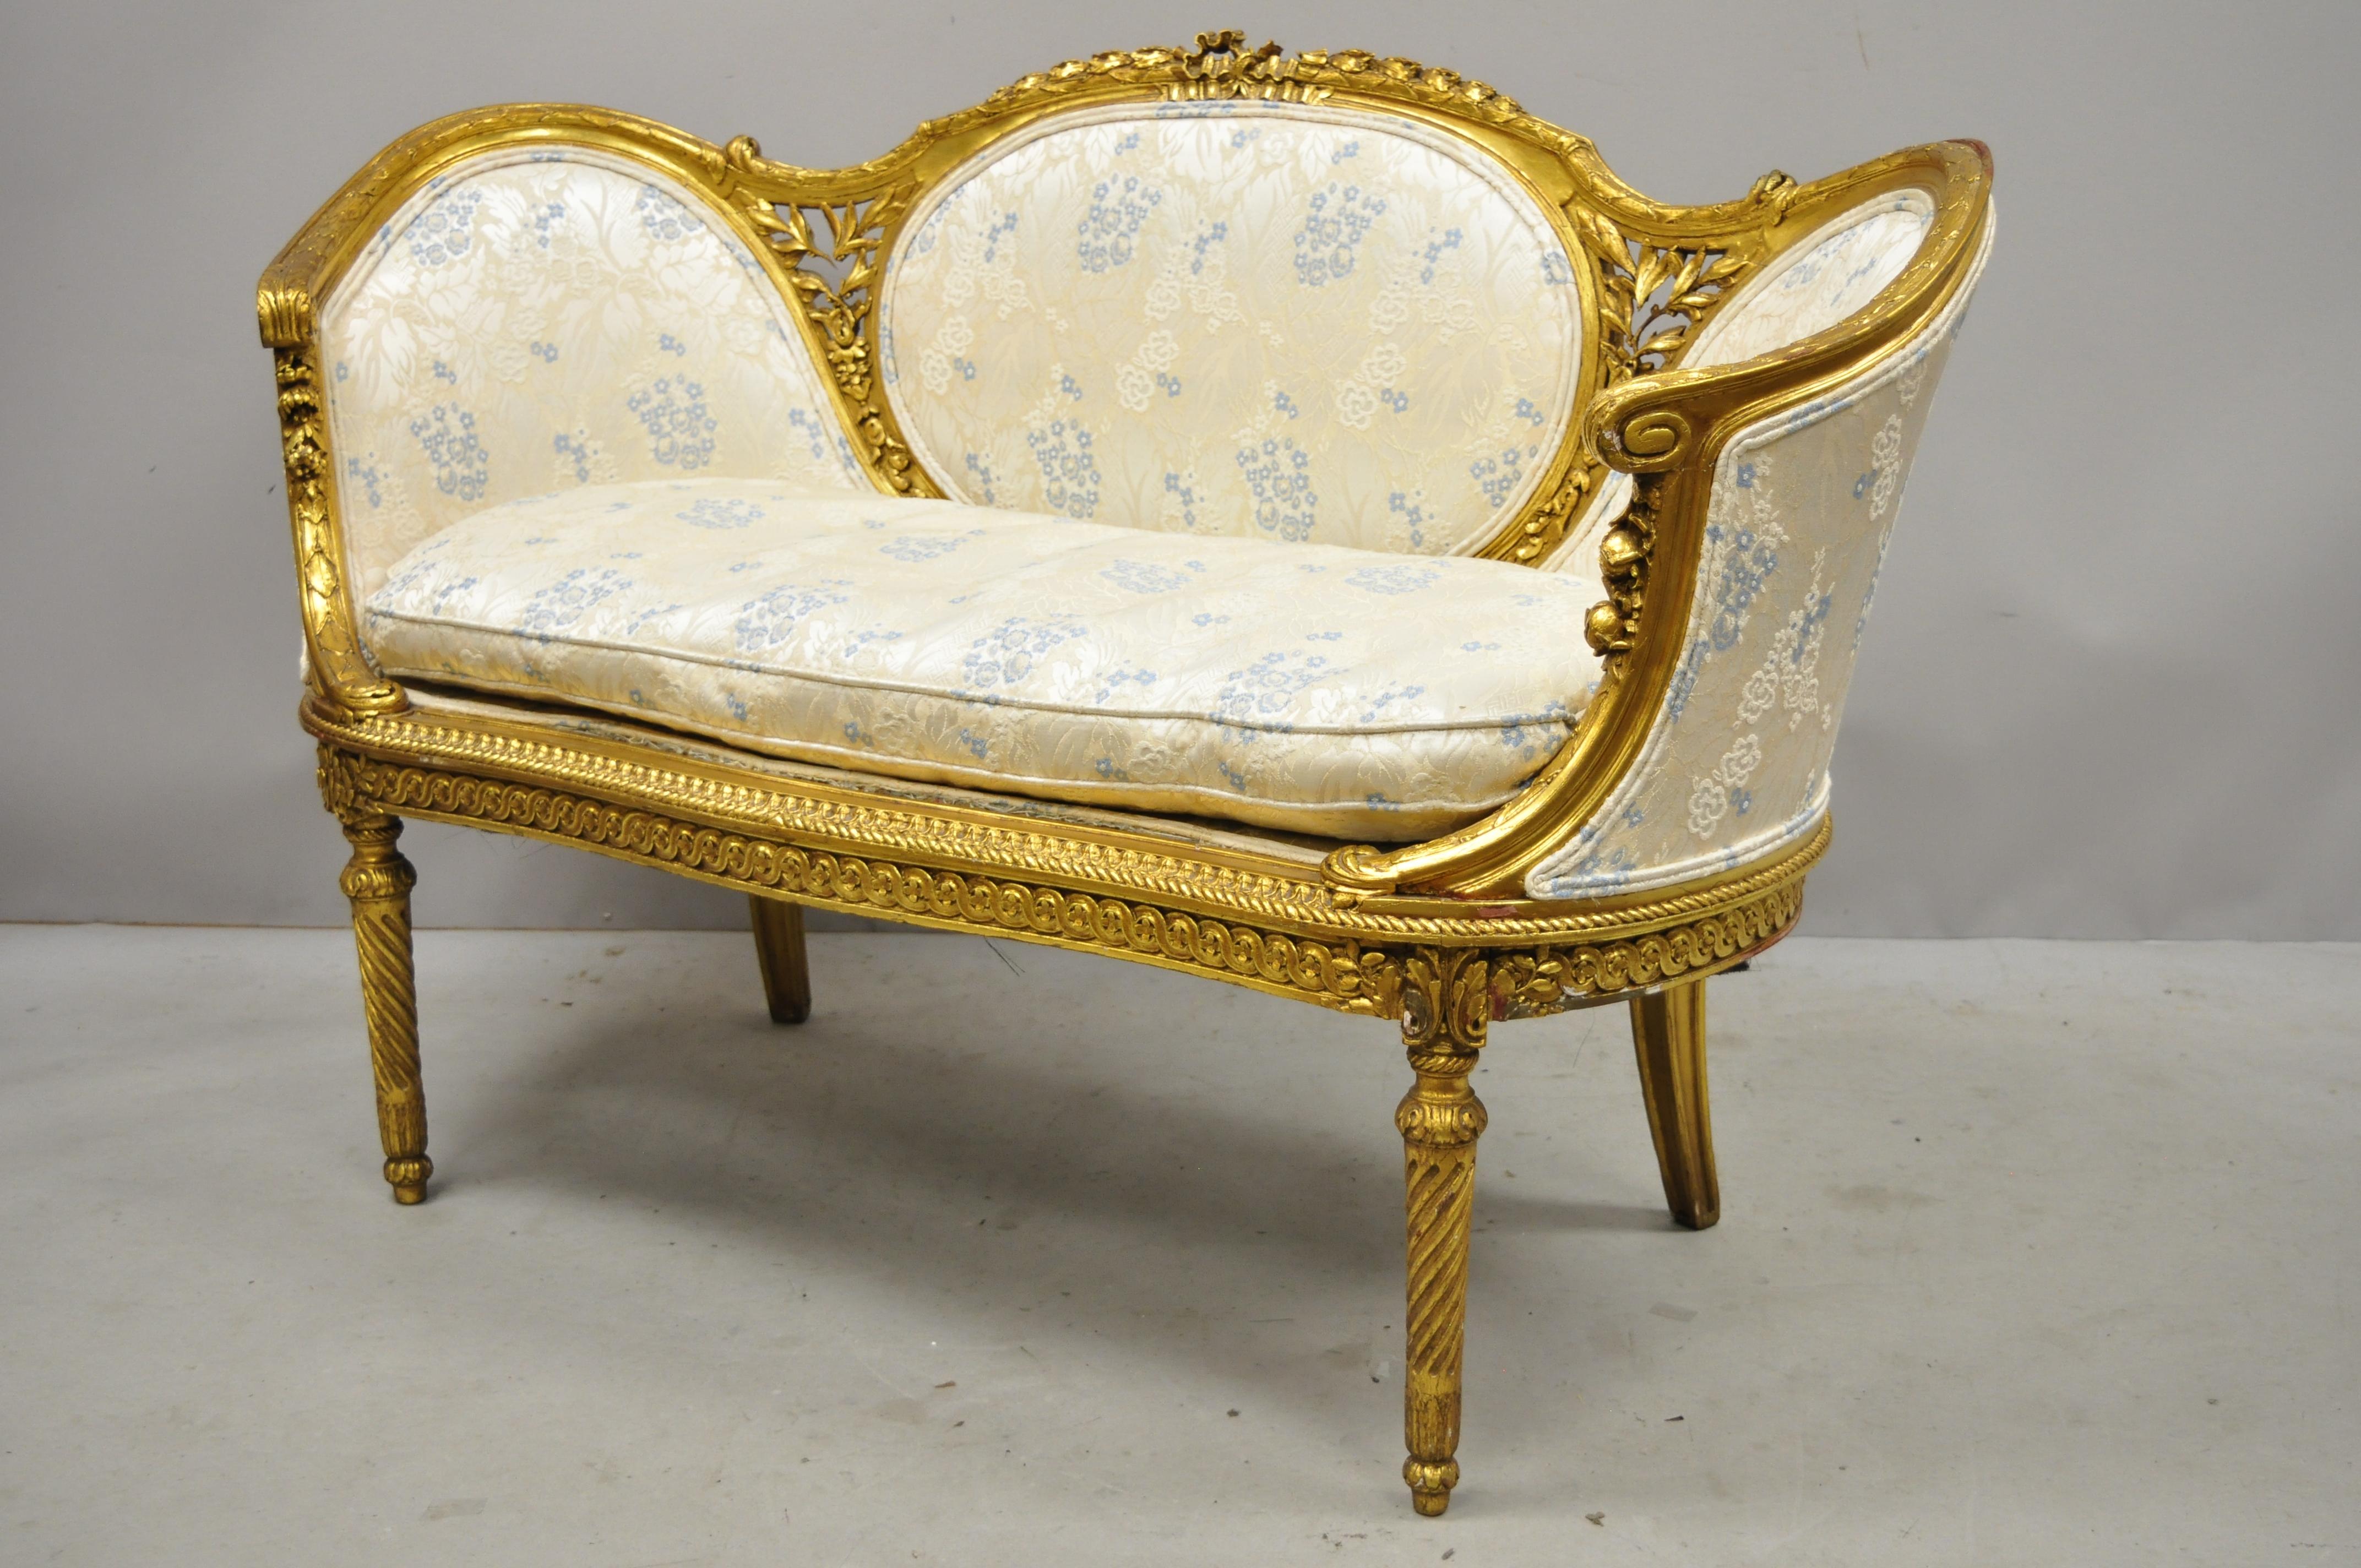 Details about   BEAUTIFUL ANTIQUE FRENCH SOFA/LOVE SEAT/SETTEE 1880 LOUIS XVI.WORLDWIDE SHIPPING 